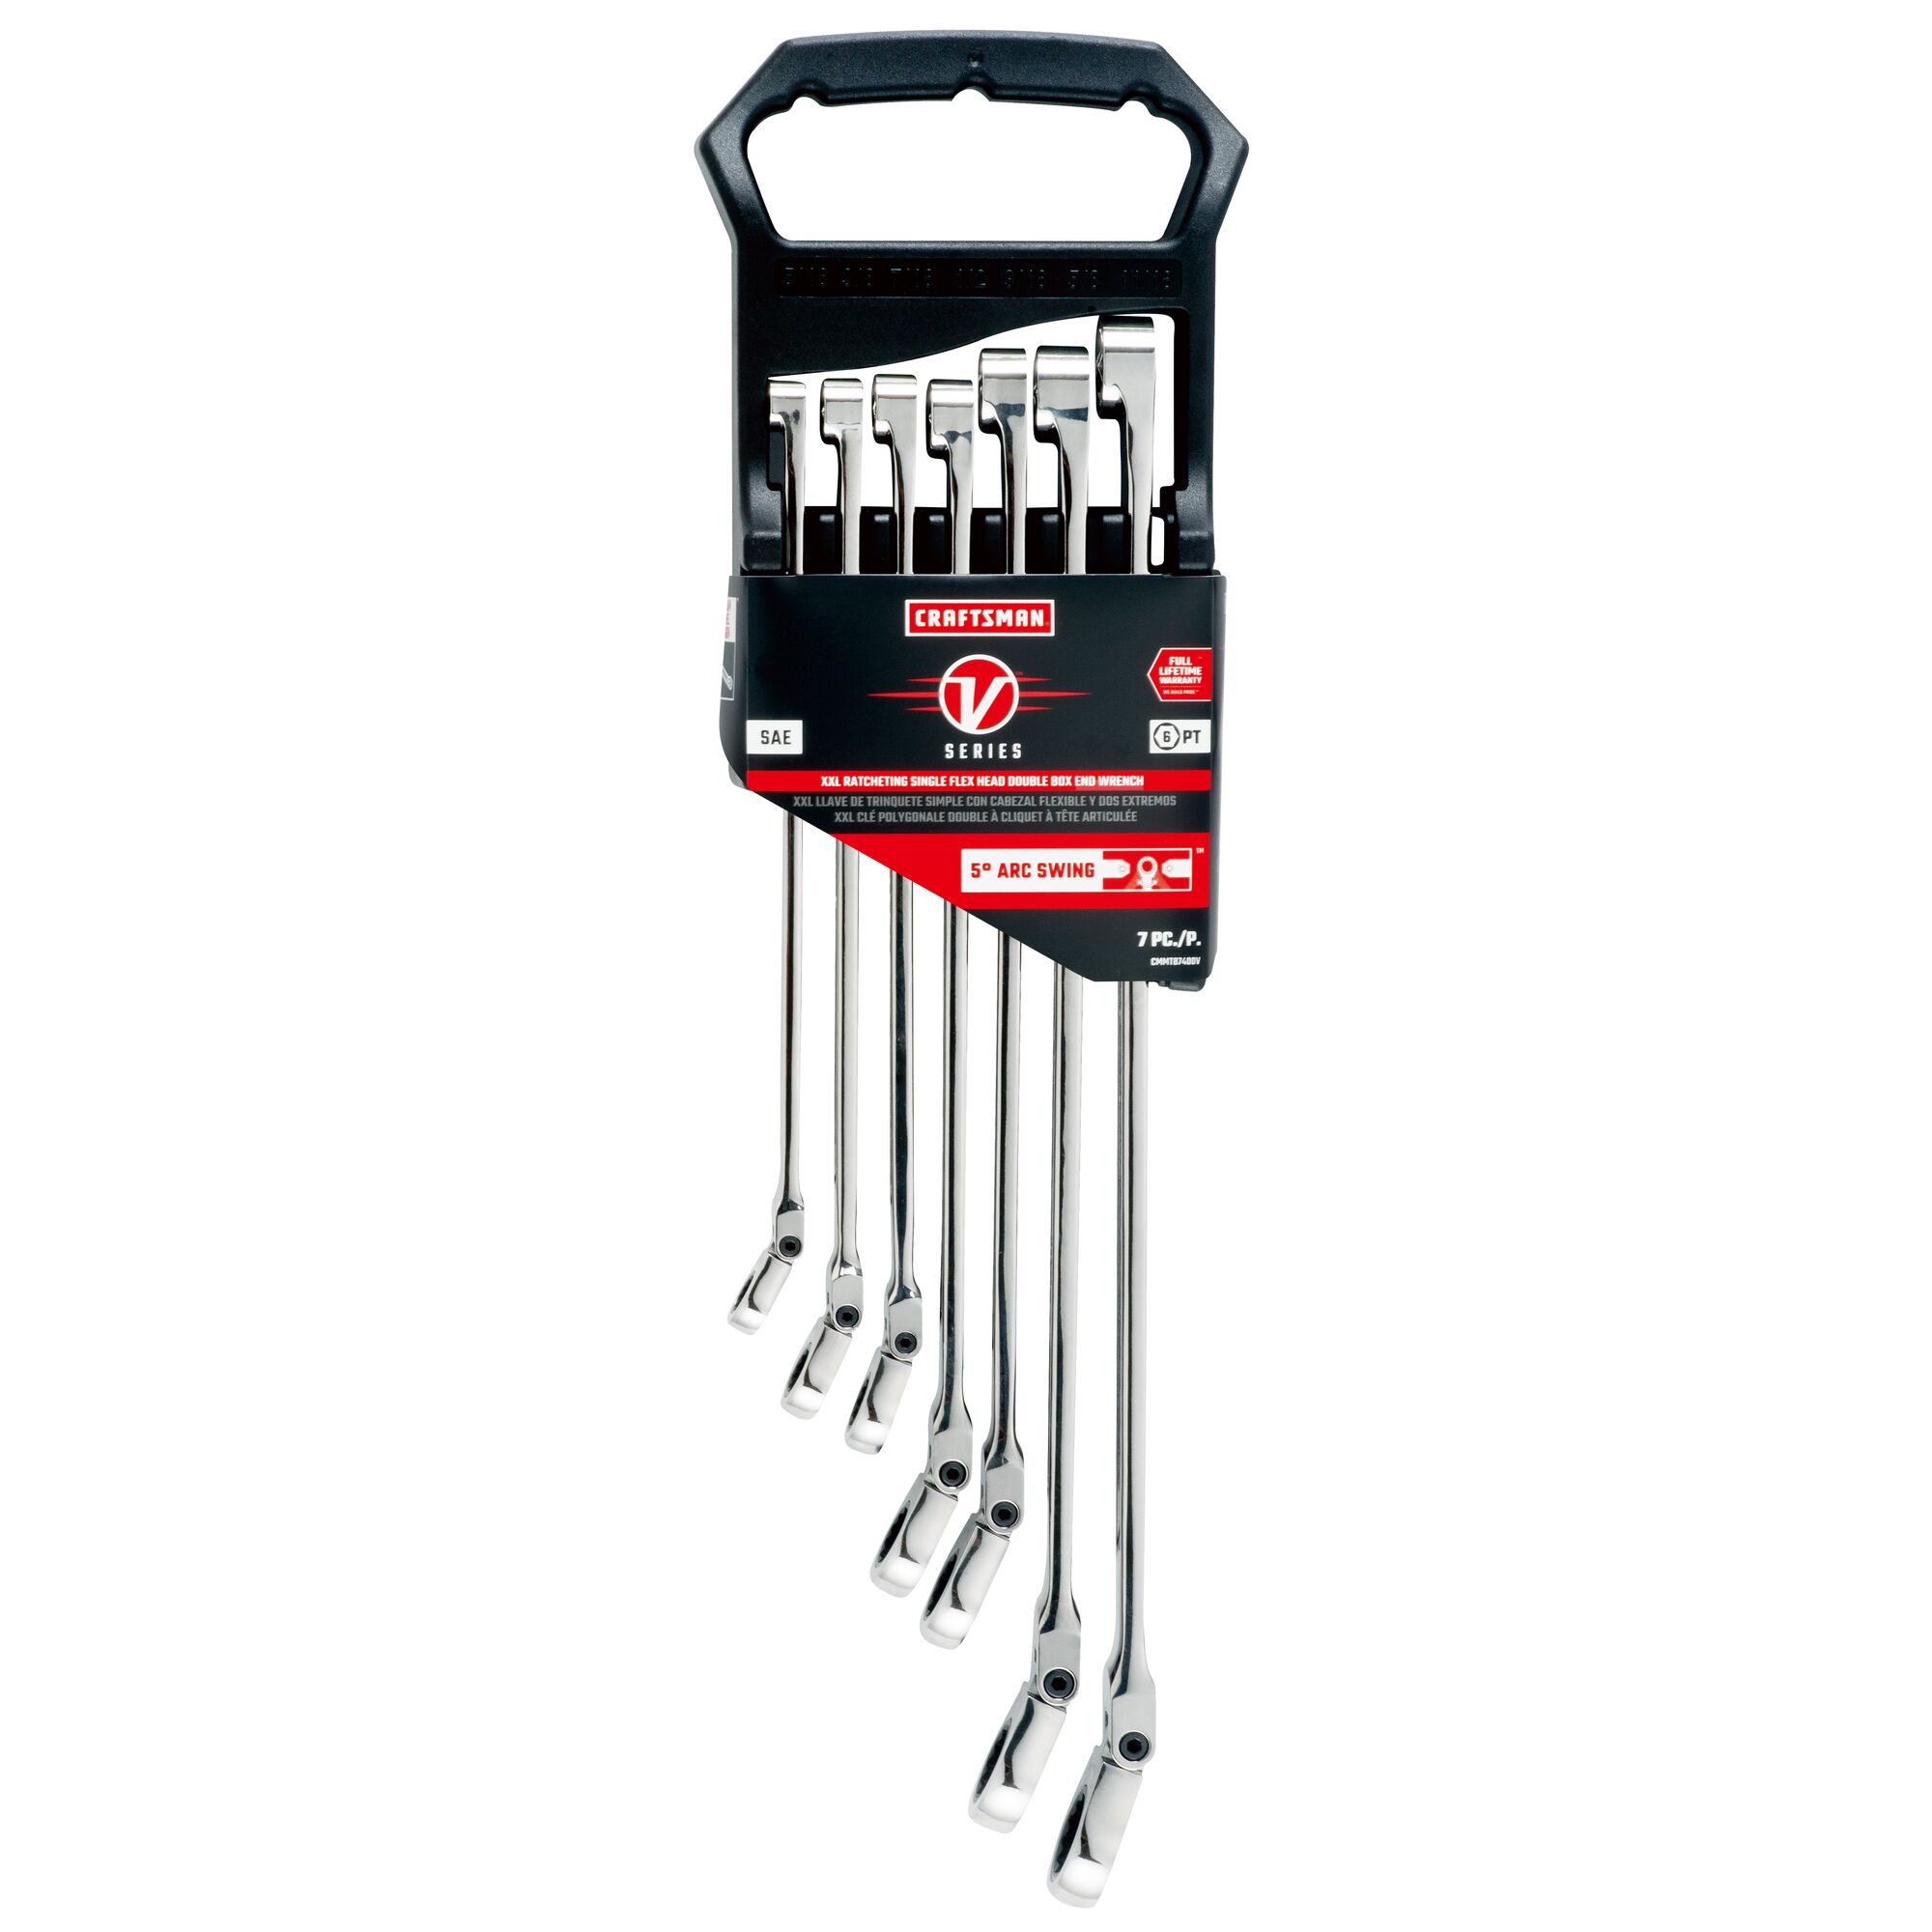 V series XXL S A E ratcheting single flex head double box end wrench set (7 piece) in packaging.